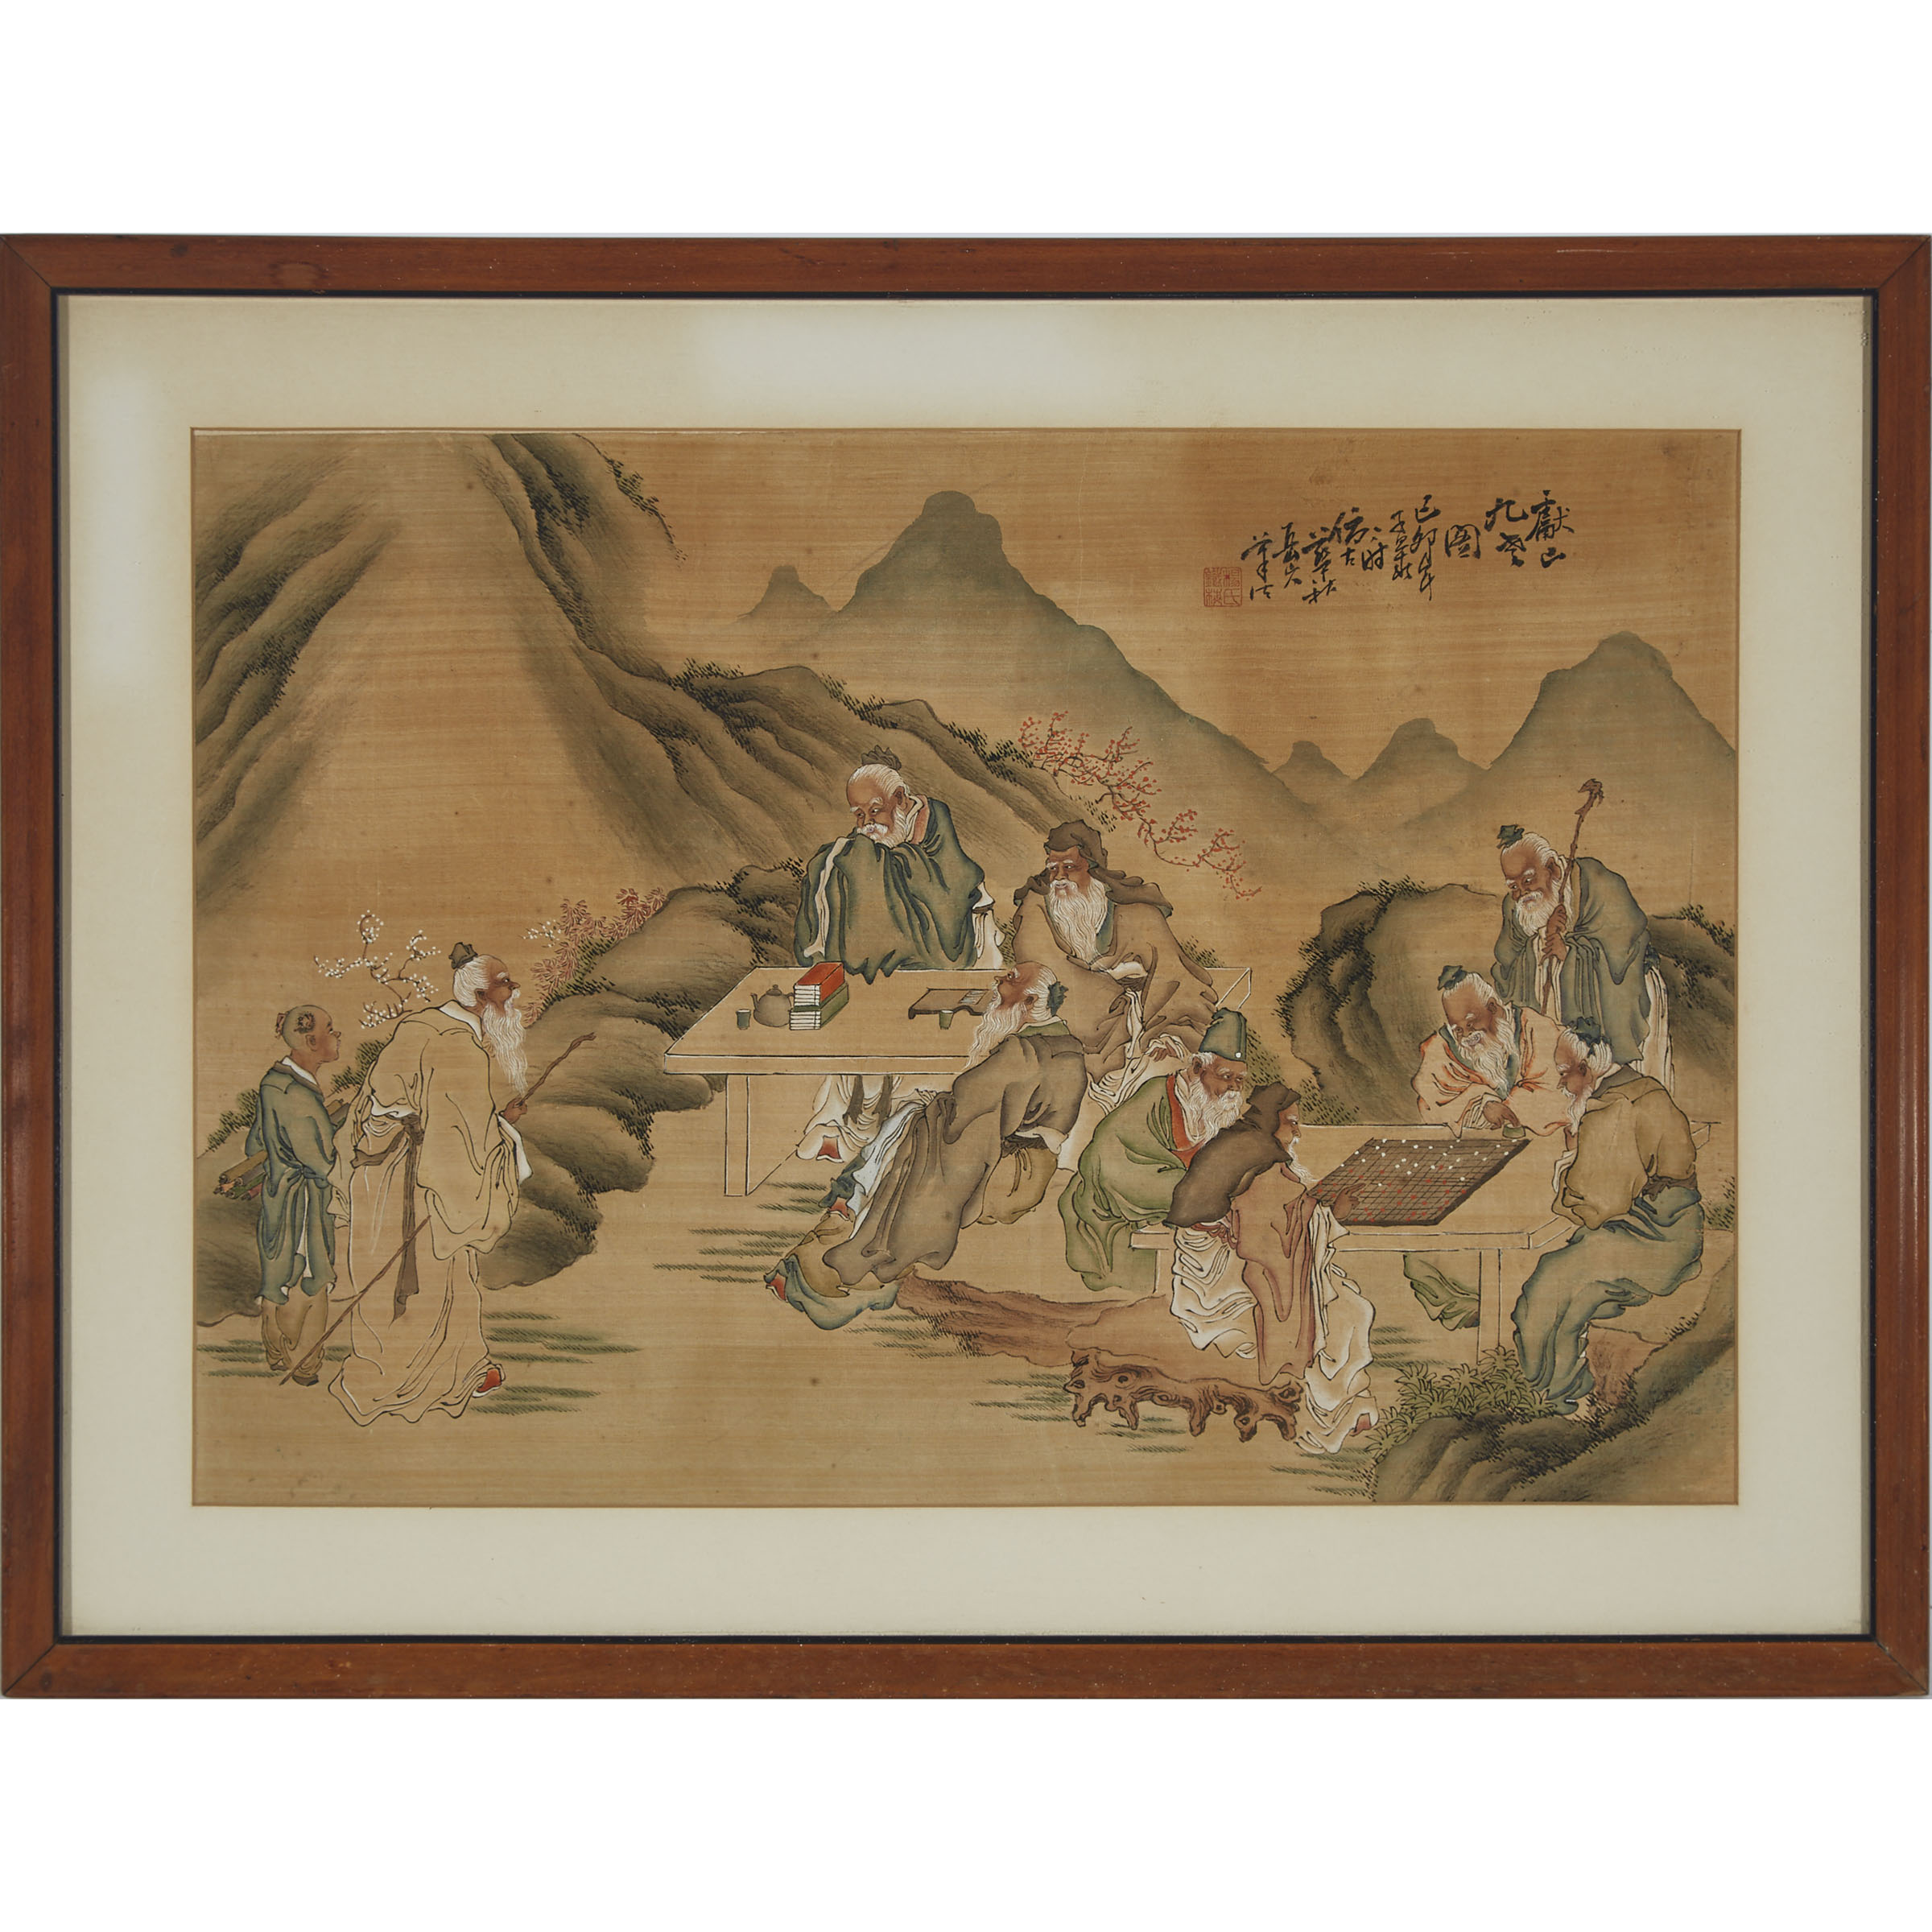 A Chinese Figural Painting, Signed Yang Tiemei, Possibly Dated 1939